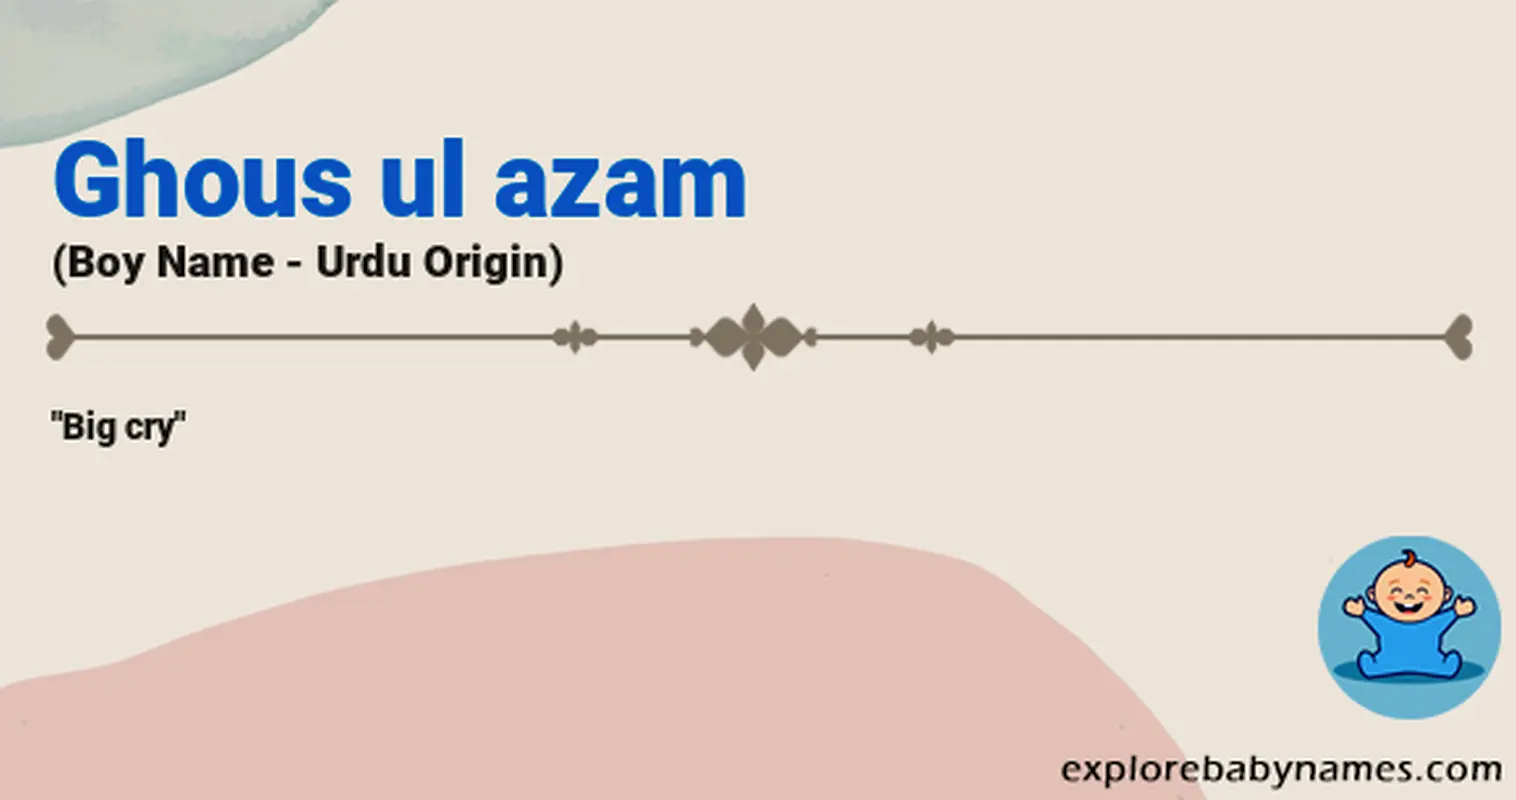 Meaning of Ghous ul azam